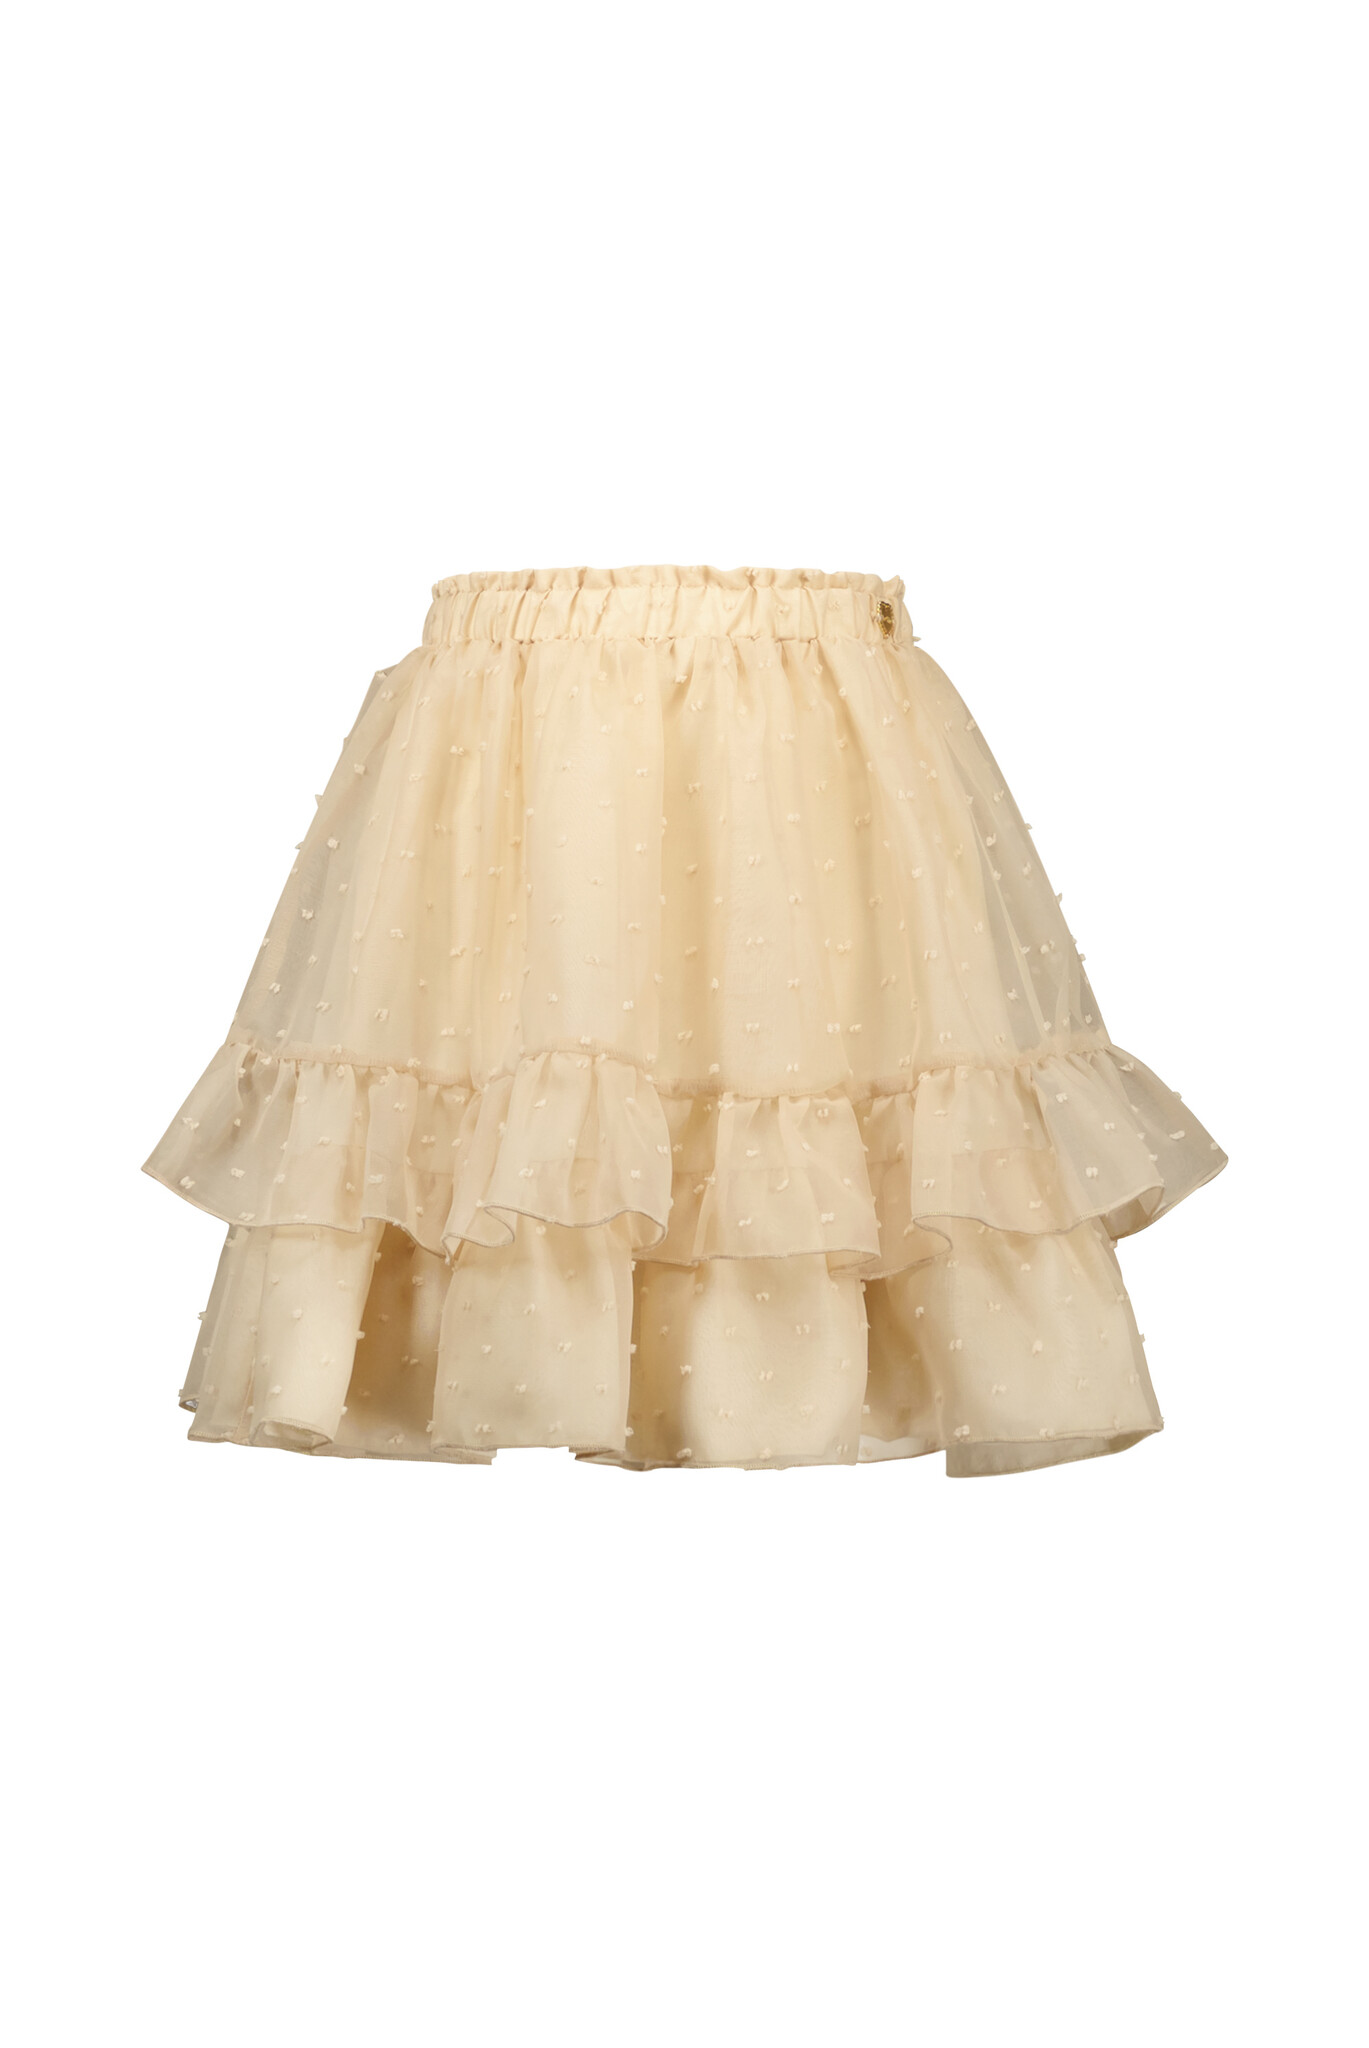 Le Chic C308-5733 Meisjes Rok - Pearled Ivory - Maat 152